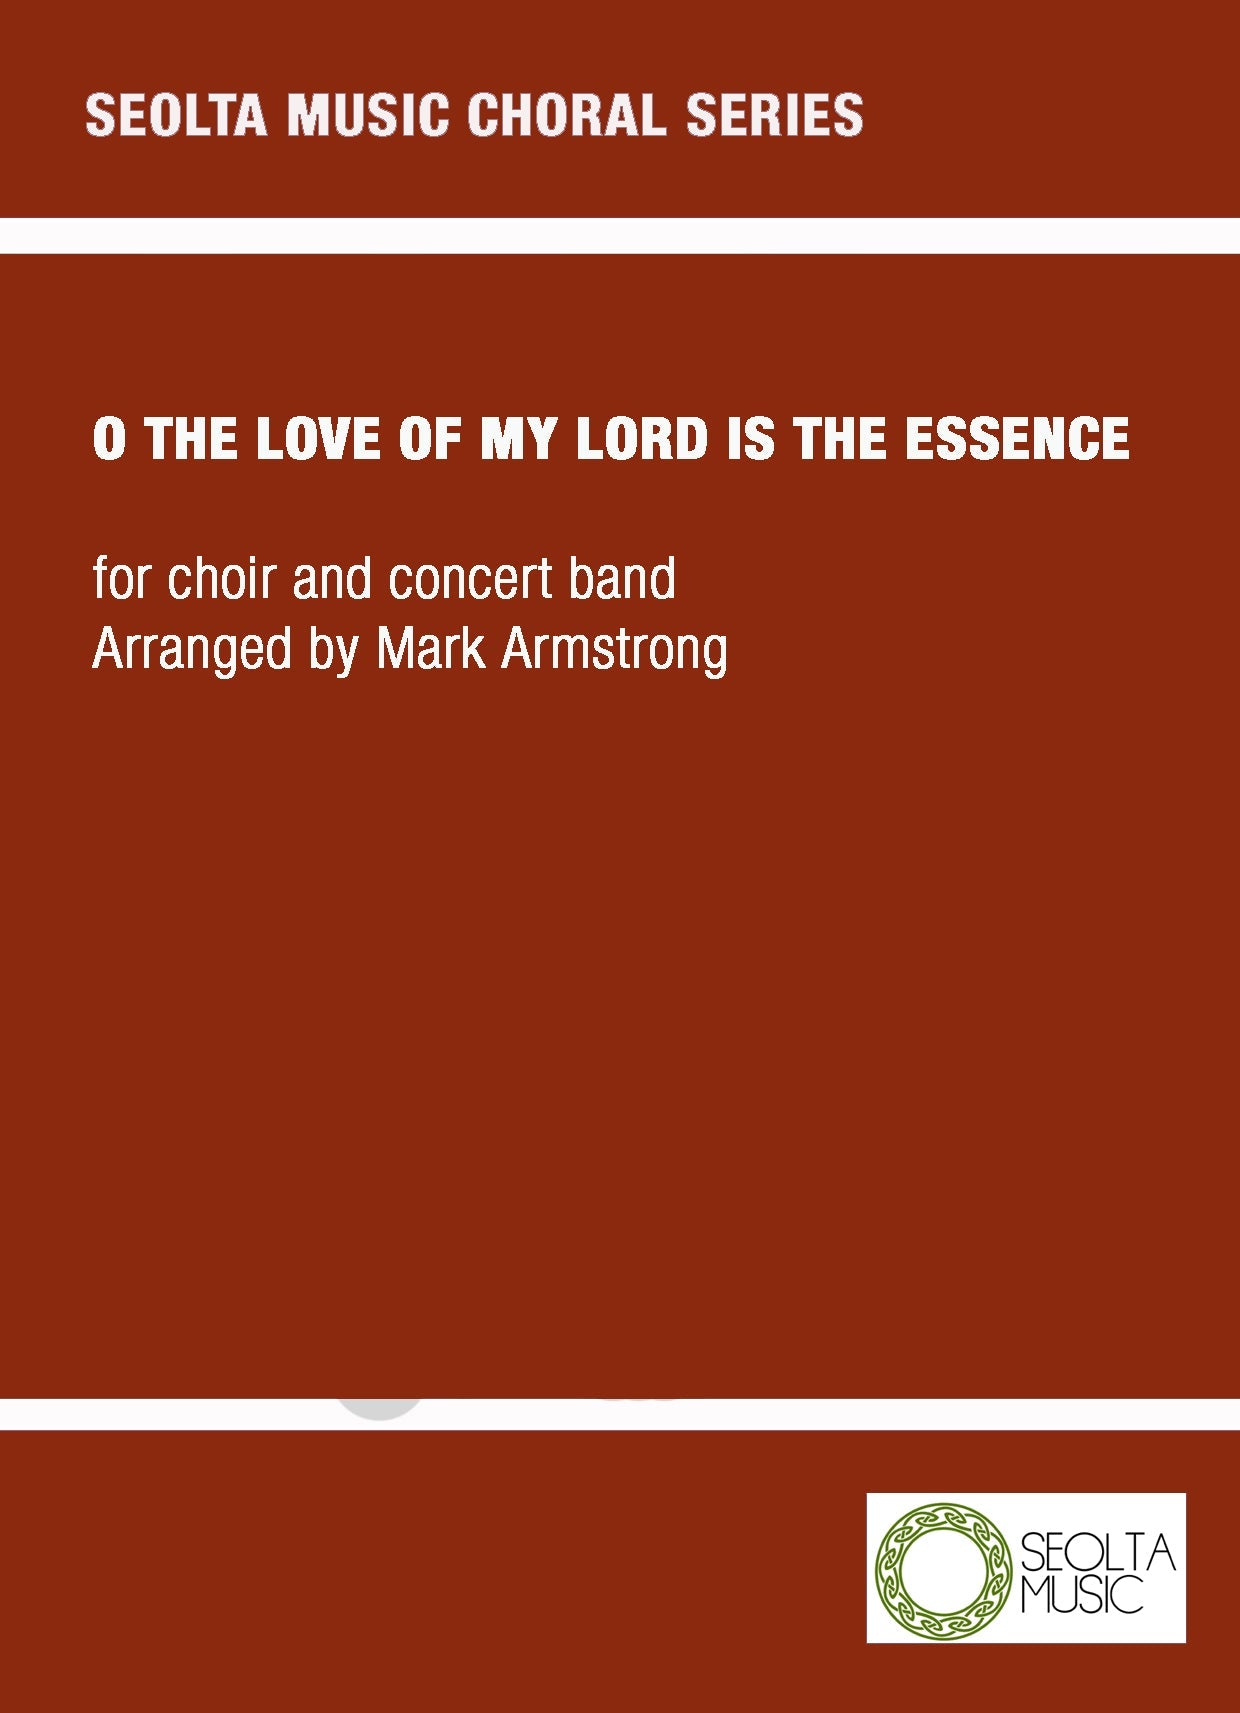 o-the-love-of-my-lord-is-the-essence-hymn-choir-band-sheet-music